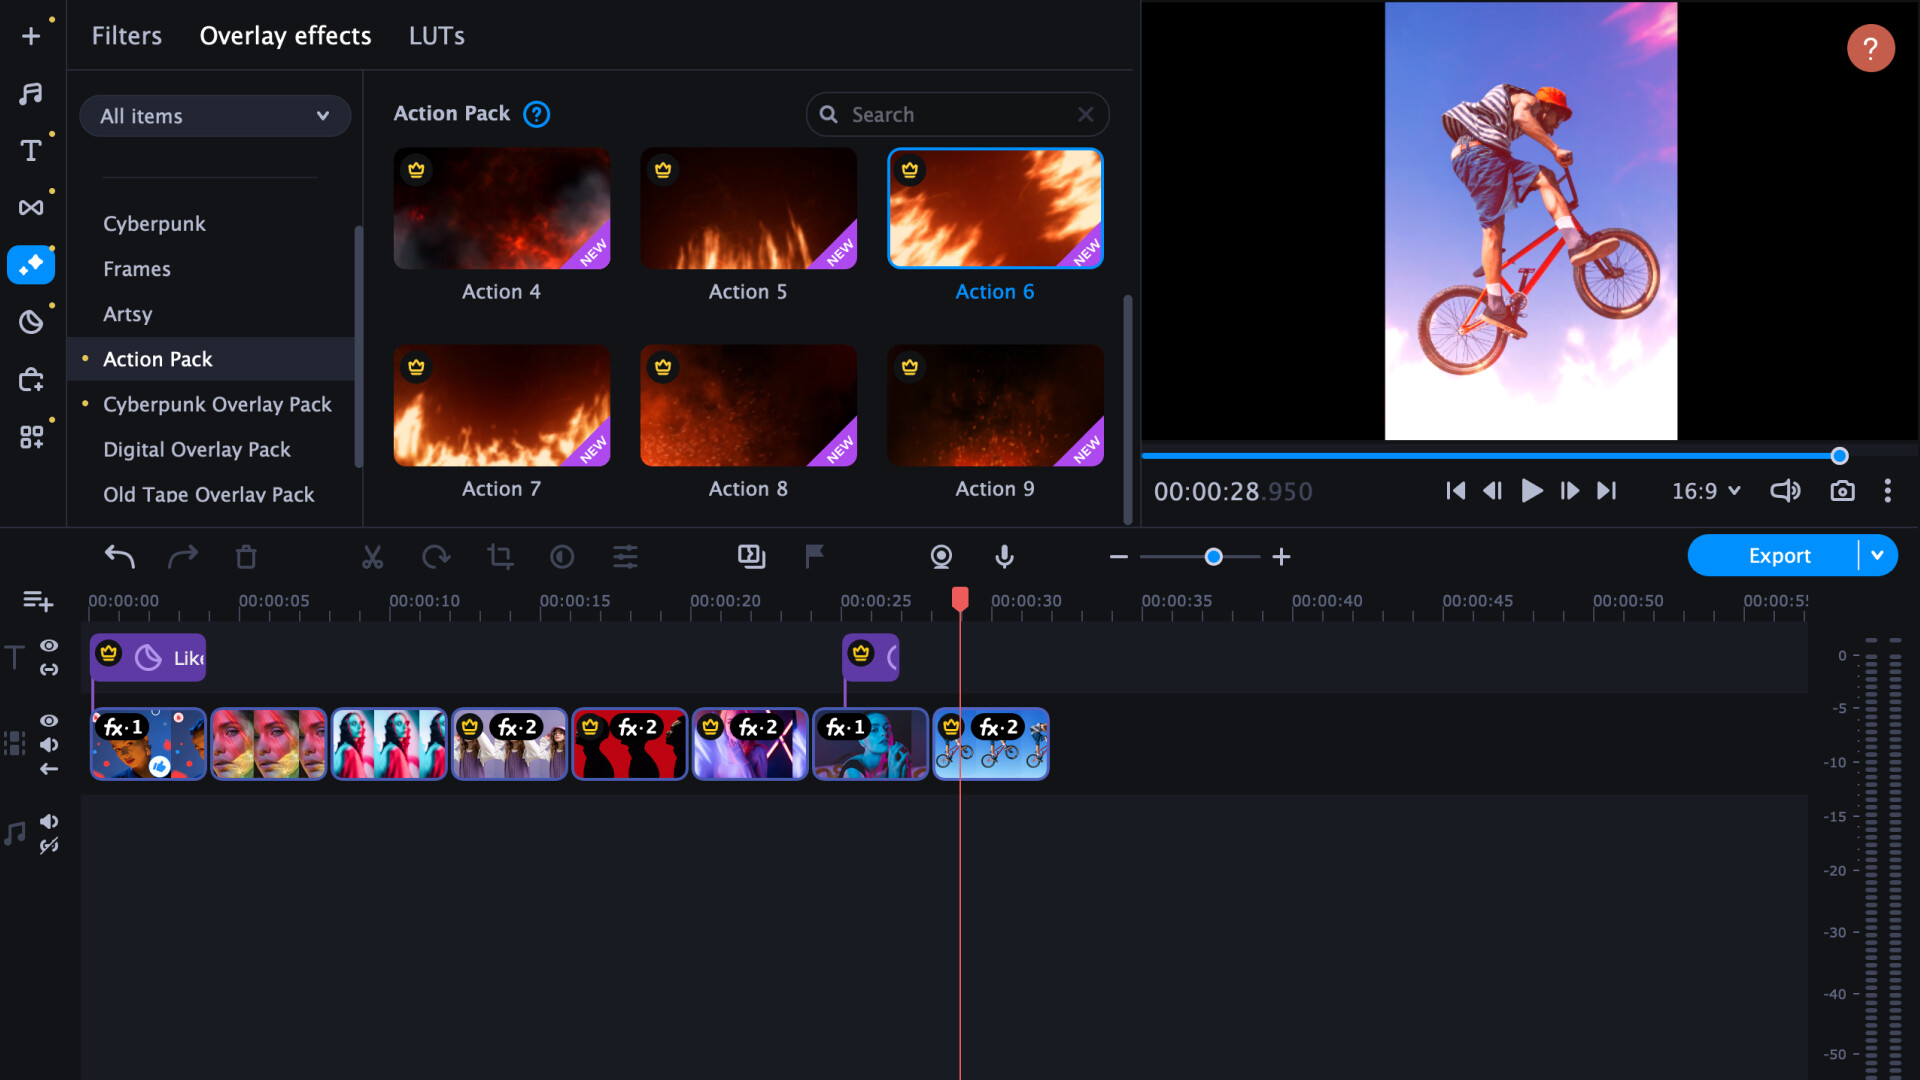 Movavi Video Editor 2023 - Action Pack Featured Screenshot #1